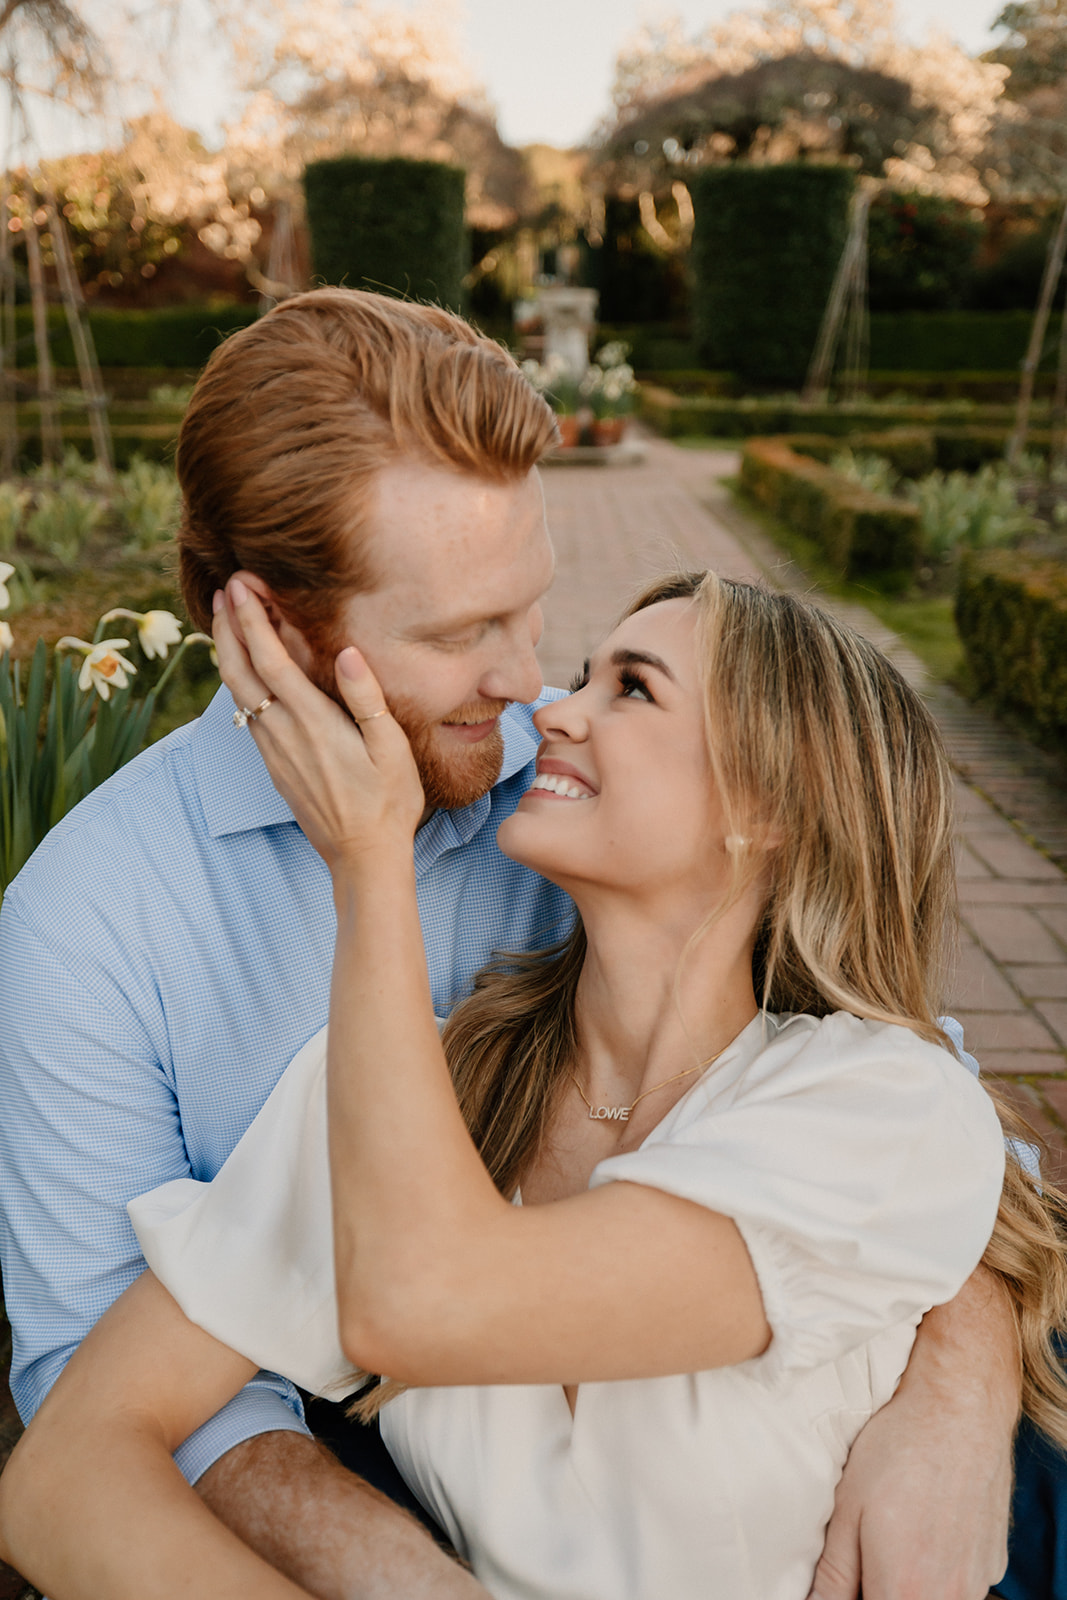 A couple embracing and smiling at, taking their engagement photos, both dressed in casual attire.